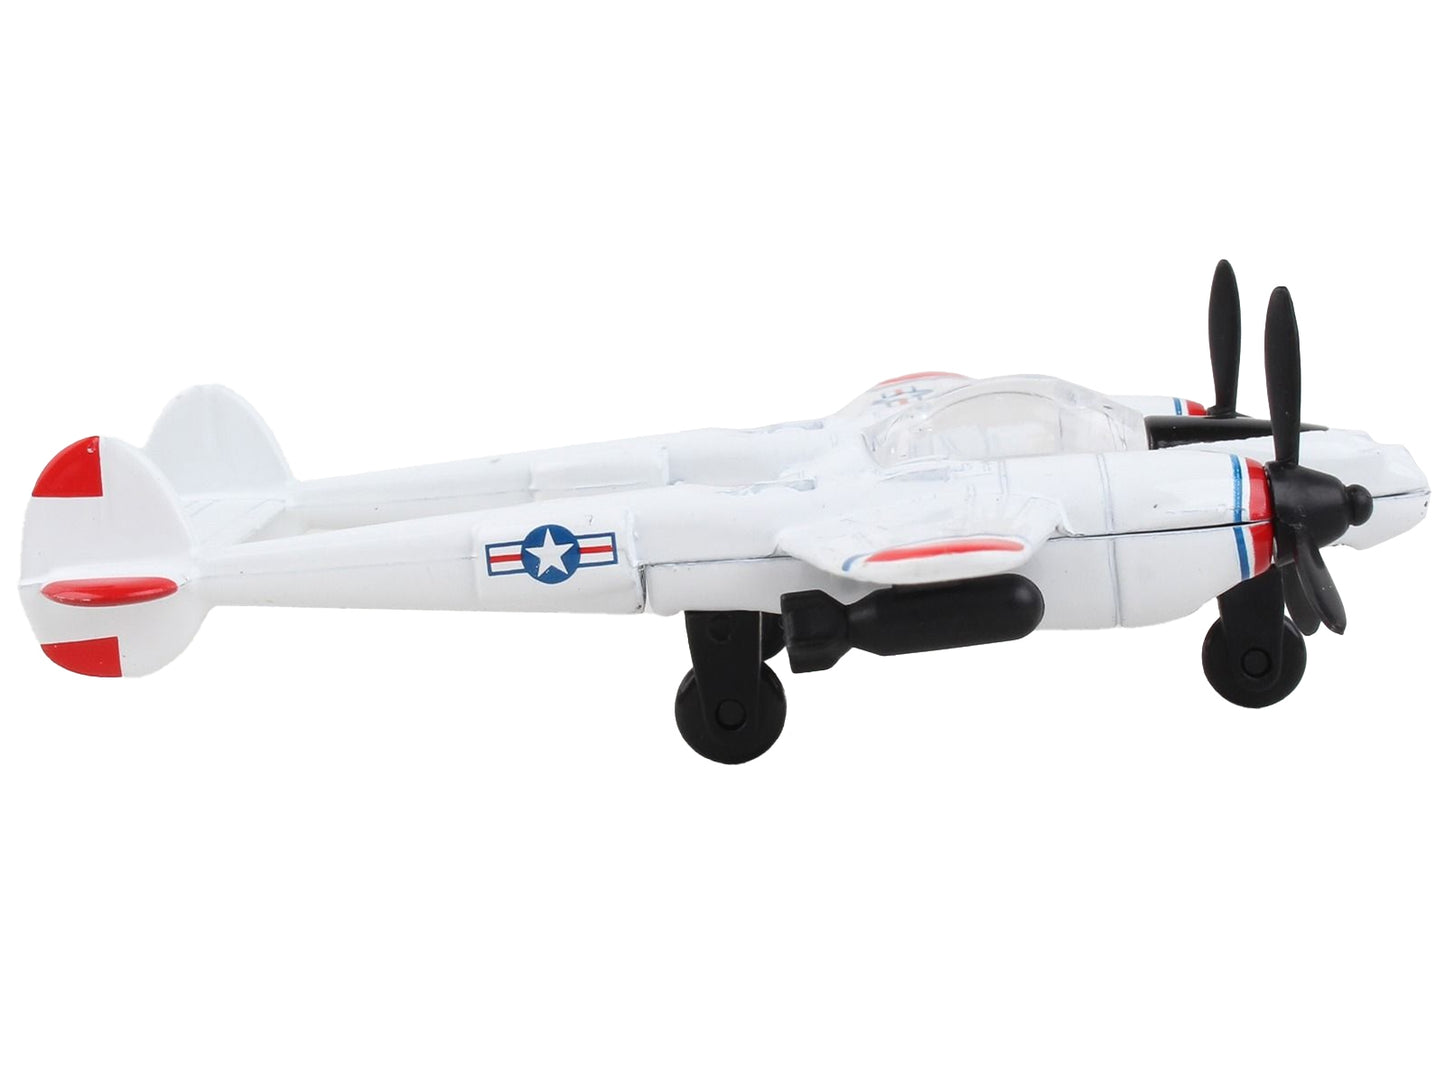 Lockheed P-38J Lightning Fighter Aircraft White with Red Wingtips "United States Army Air Force" with Runway Section Diecast Model Airplane by Runway24